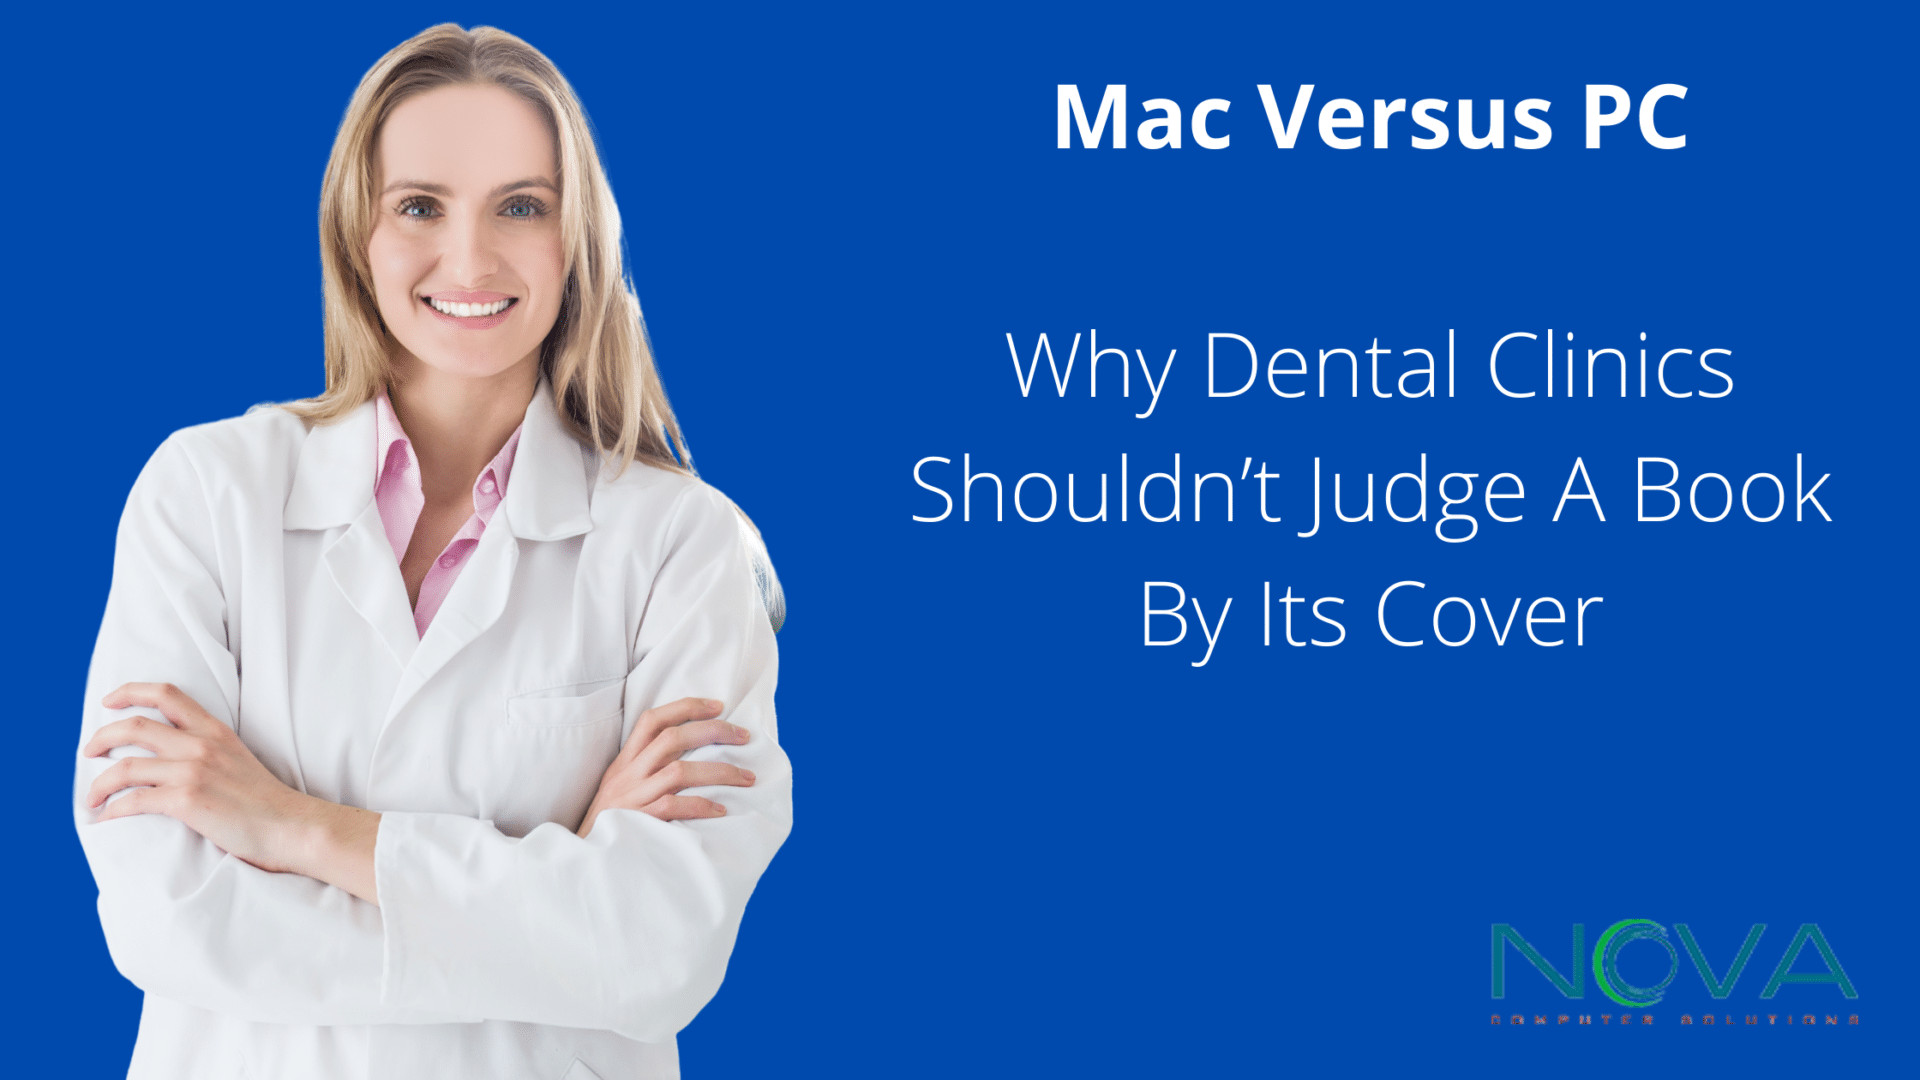 Mac Versus PC: Why Dental Clinics Shouldn’t Judge A Book By Its Cover